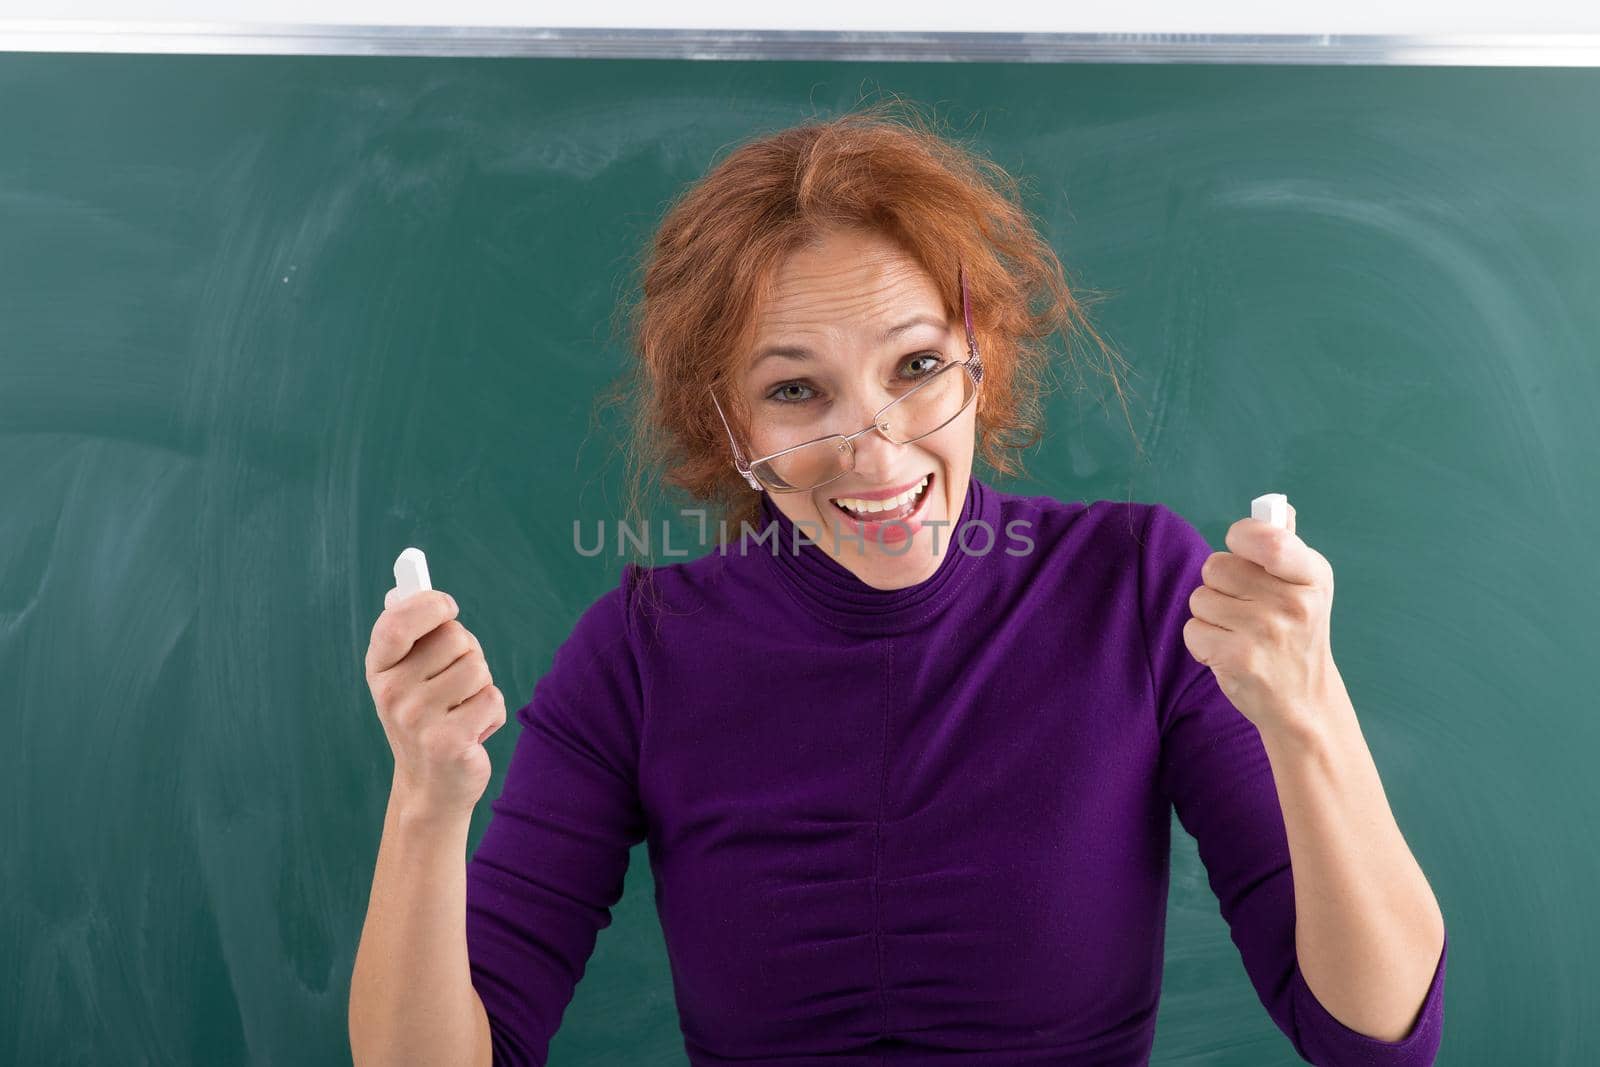 Teacher holding pieces of chalks in her hands. Excited young woman wearing glasses and casual dress standing in front of blackboard. Cheerful teacher posing at green chalkboard